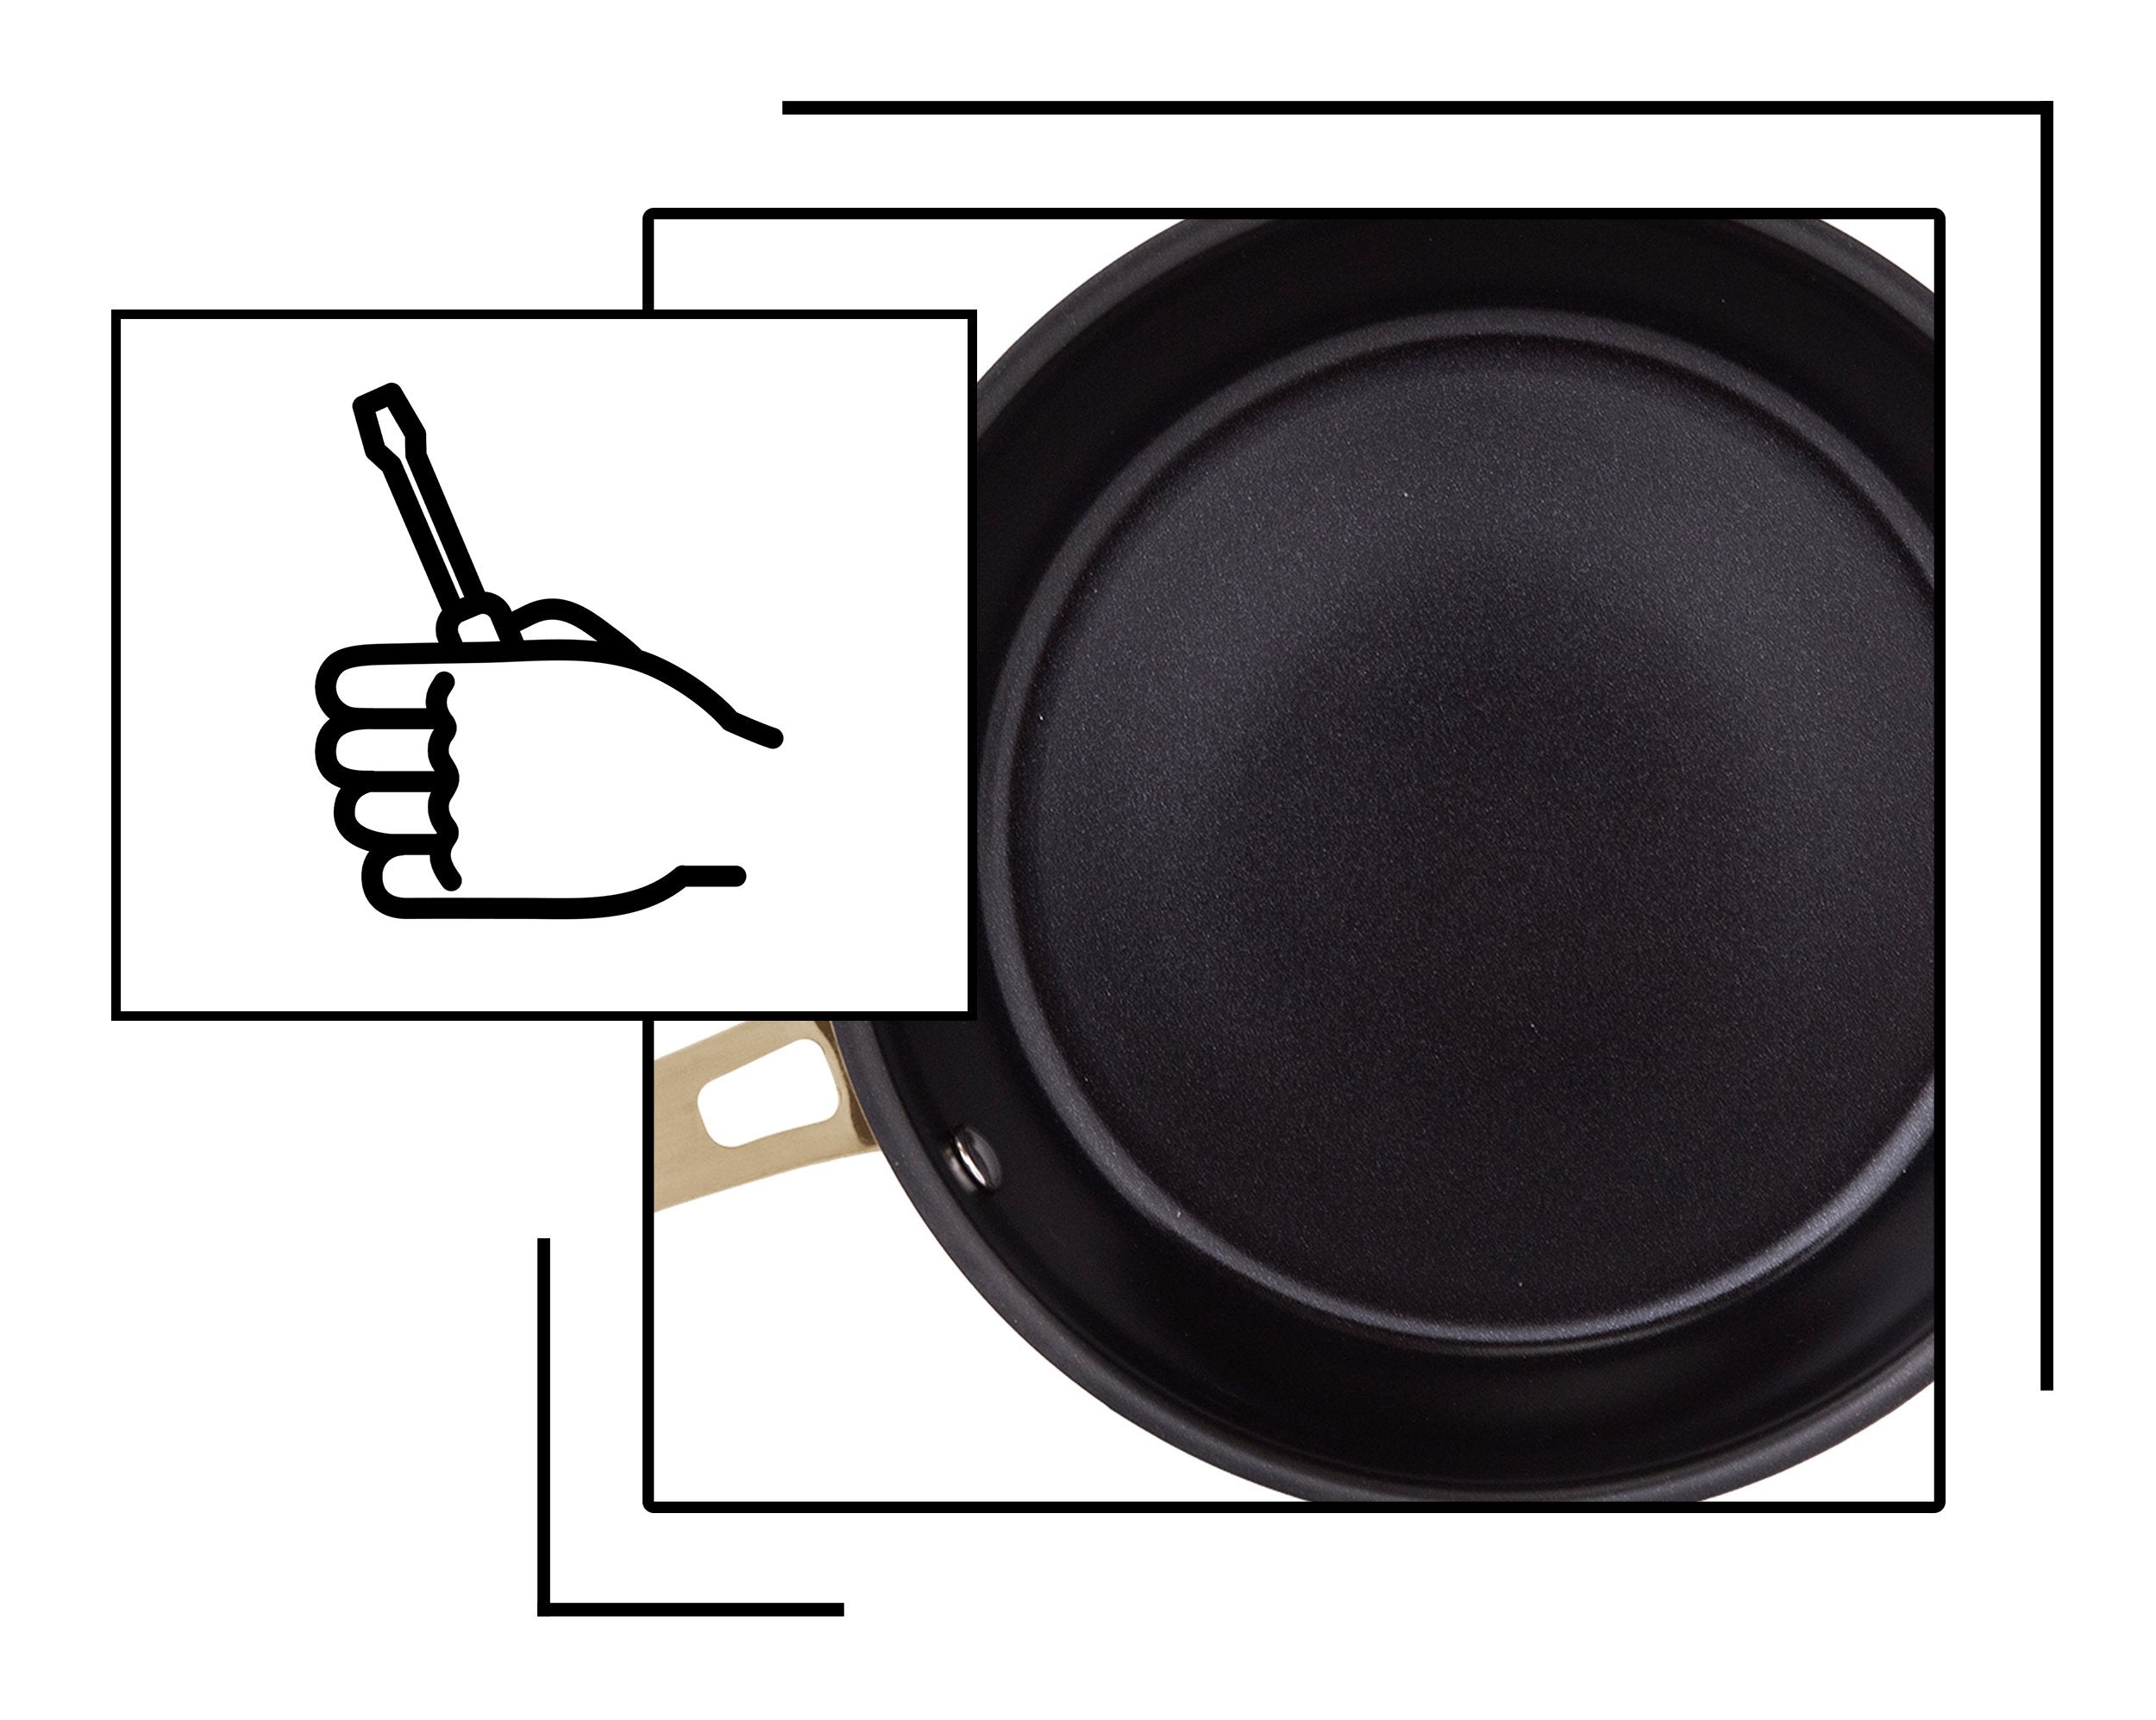 Icon and image representing superior cookware craftsmanship